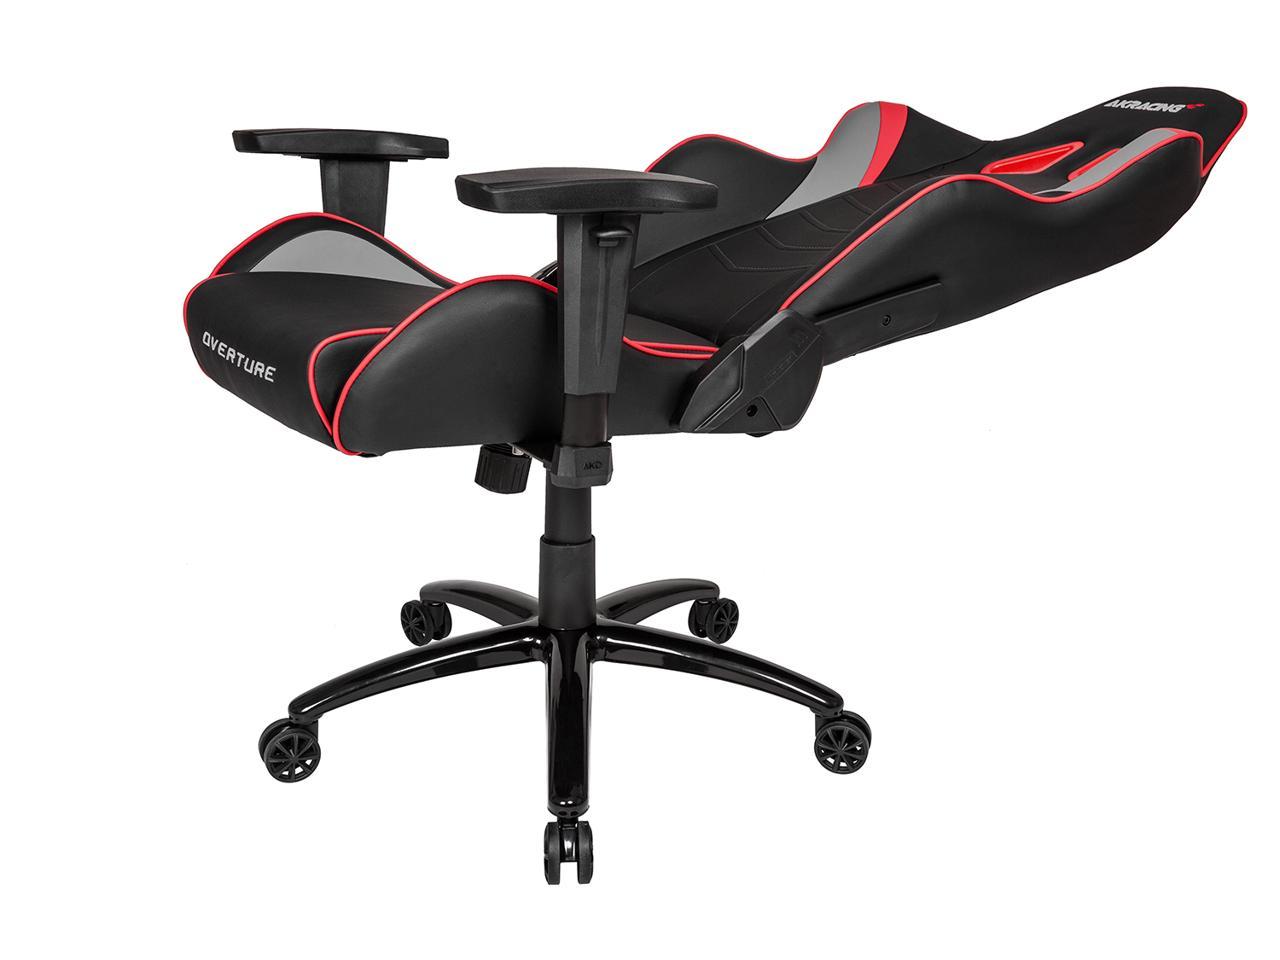 AKRacing Overture Series Super-Premium Gaming Chair with High